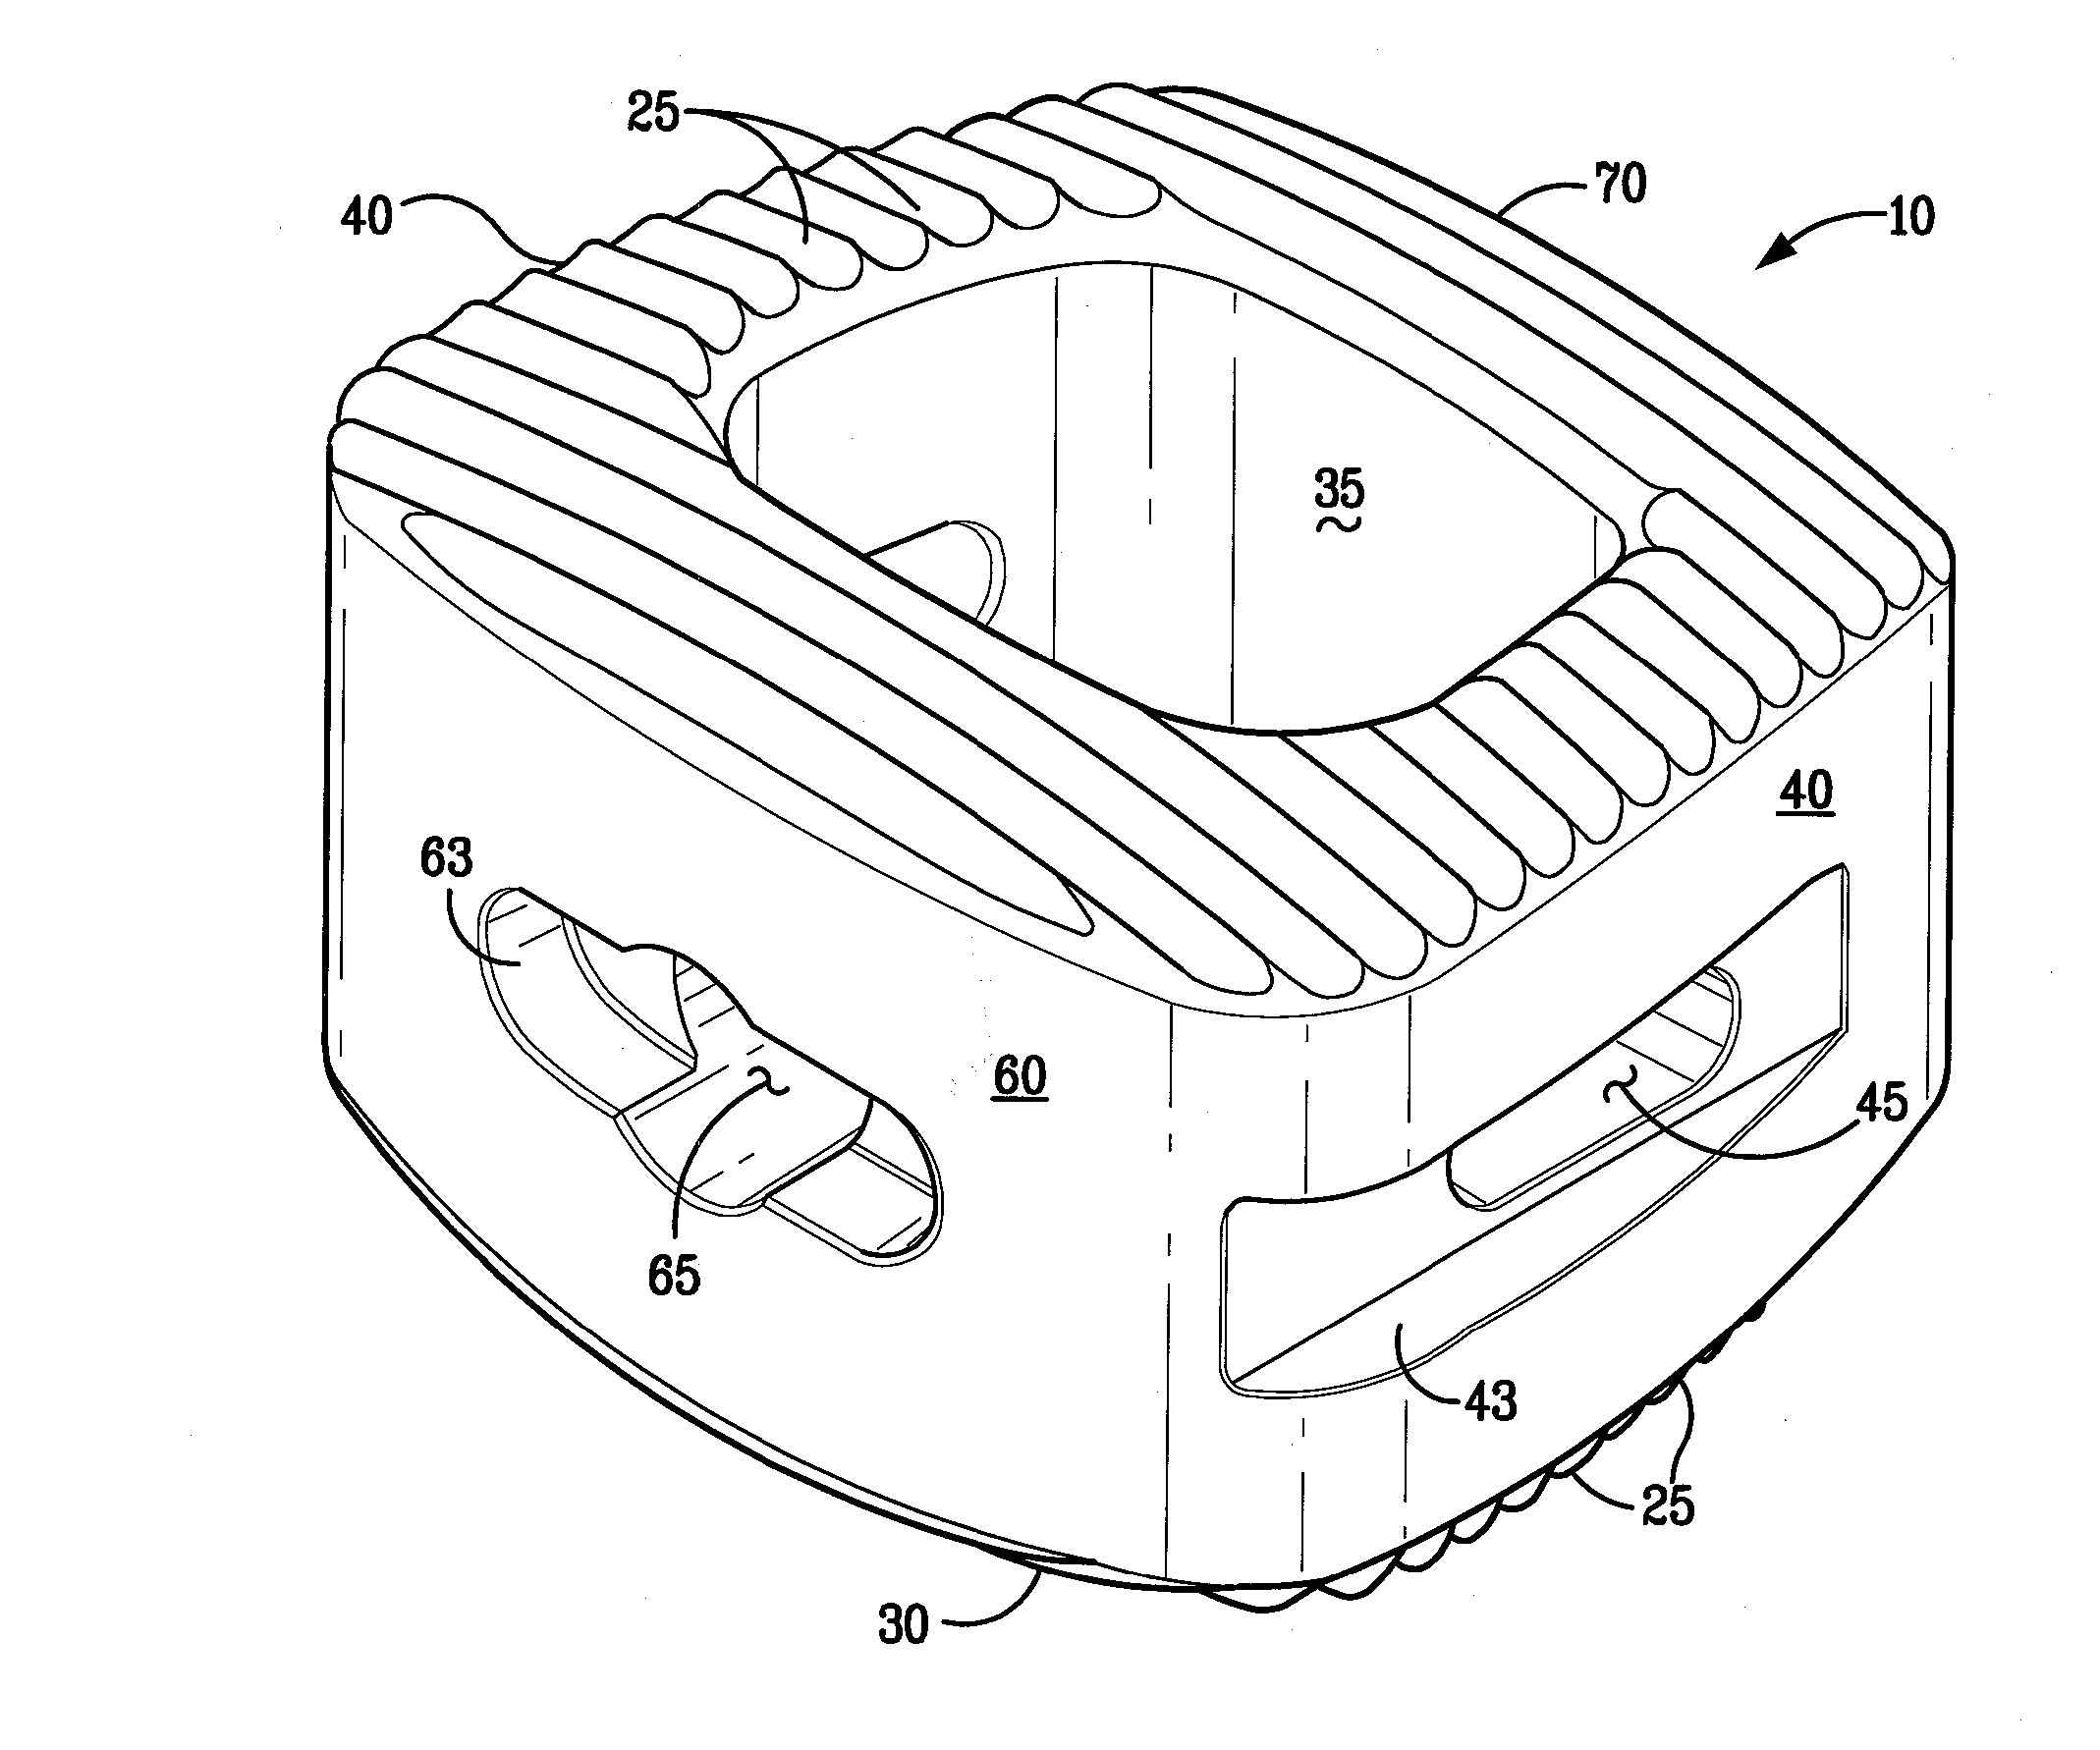 Bioactive Spinal Implants and Method of Manufacture Thereof